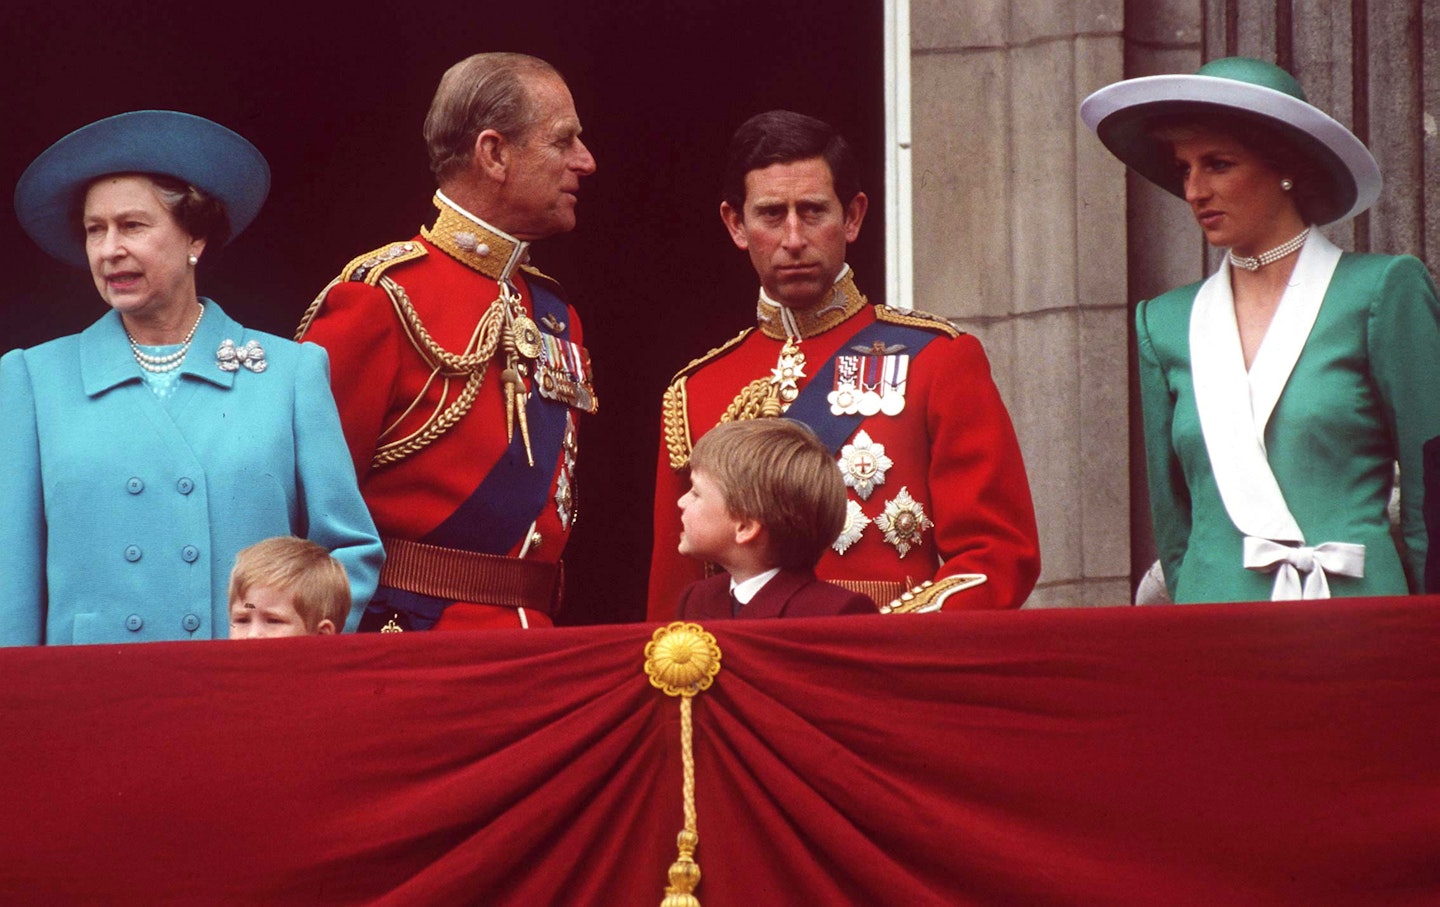 The Best Pictures of Prince Philip With His Grandsons, Prince William and Prince Harry